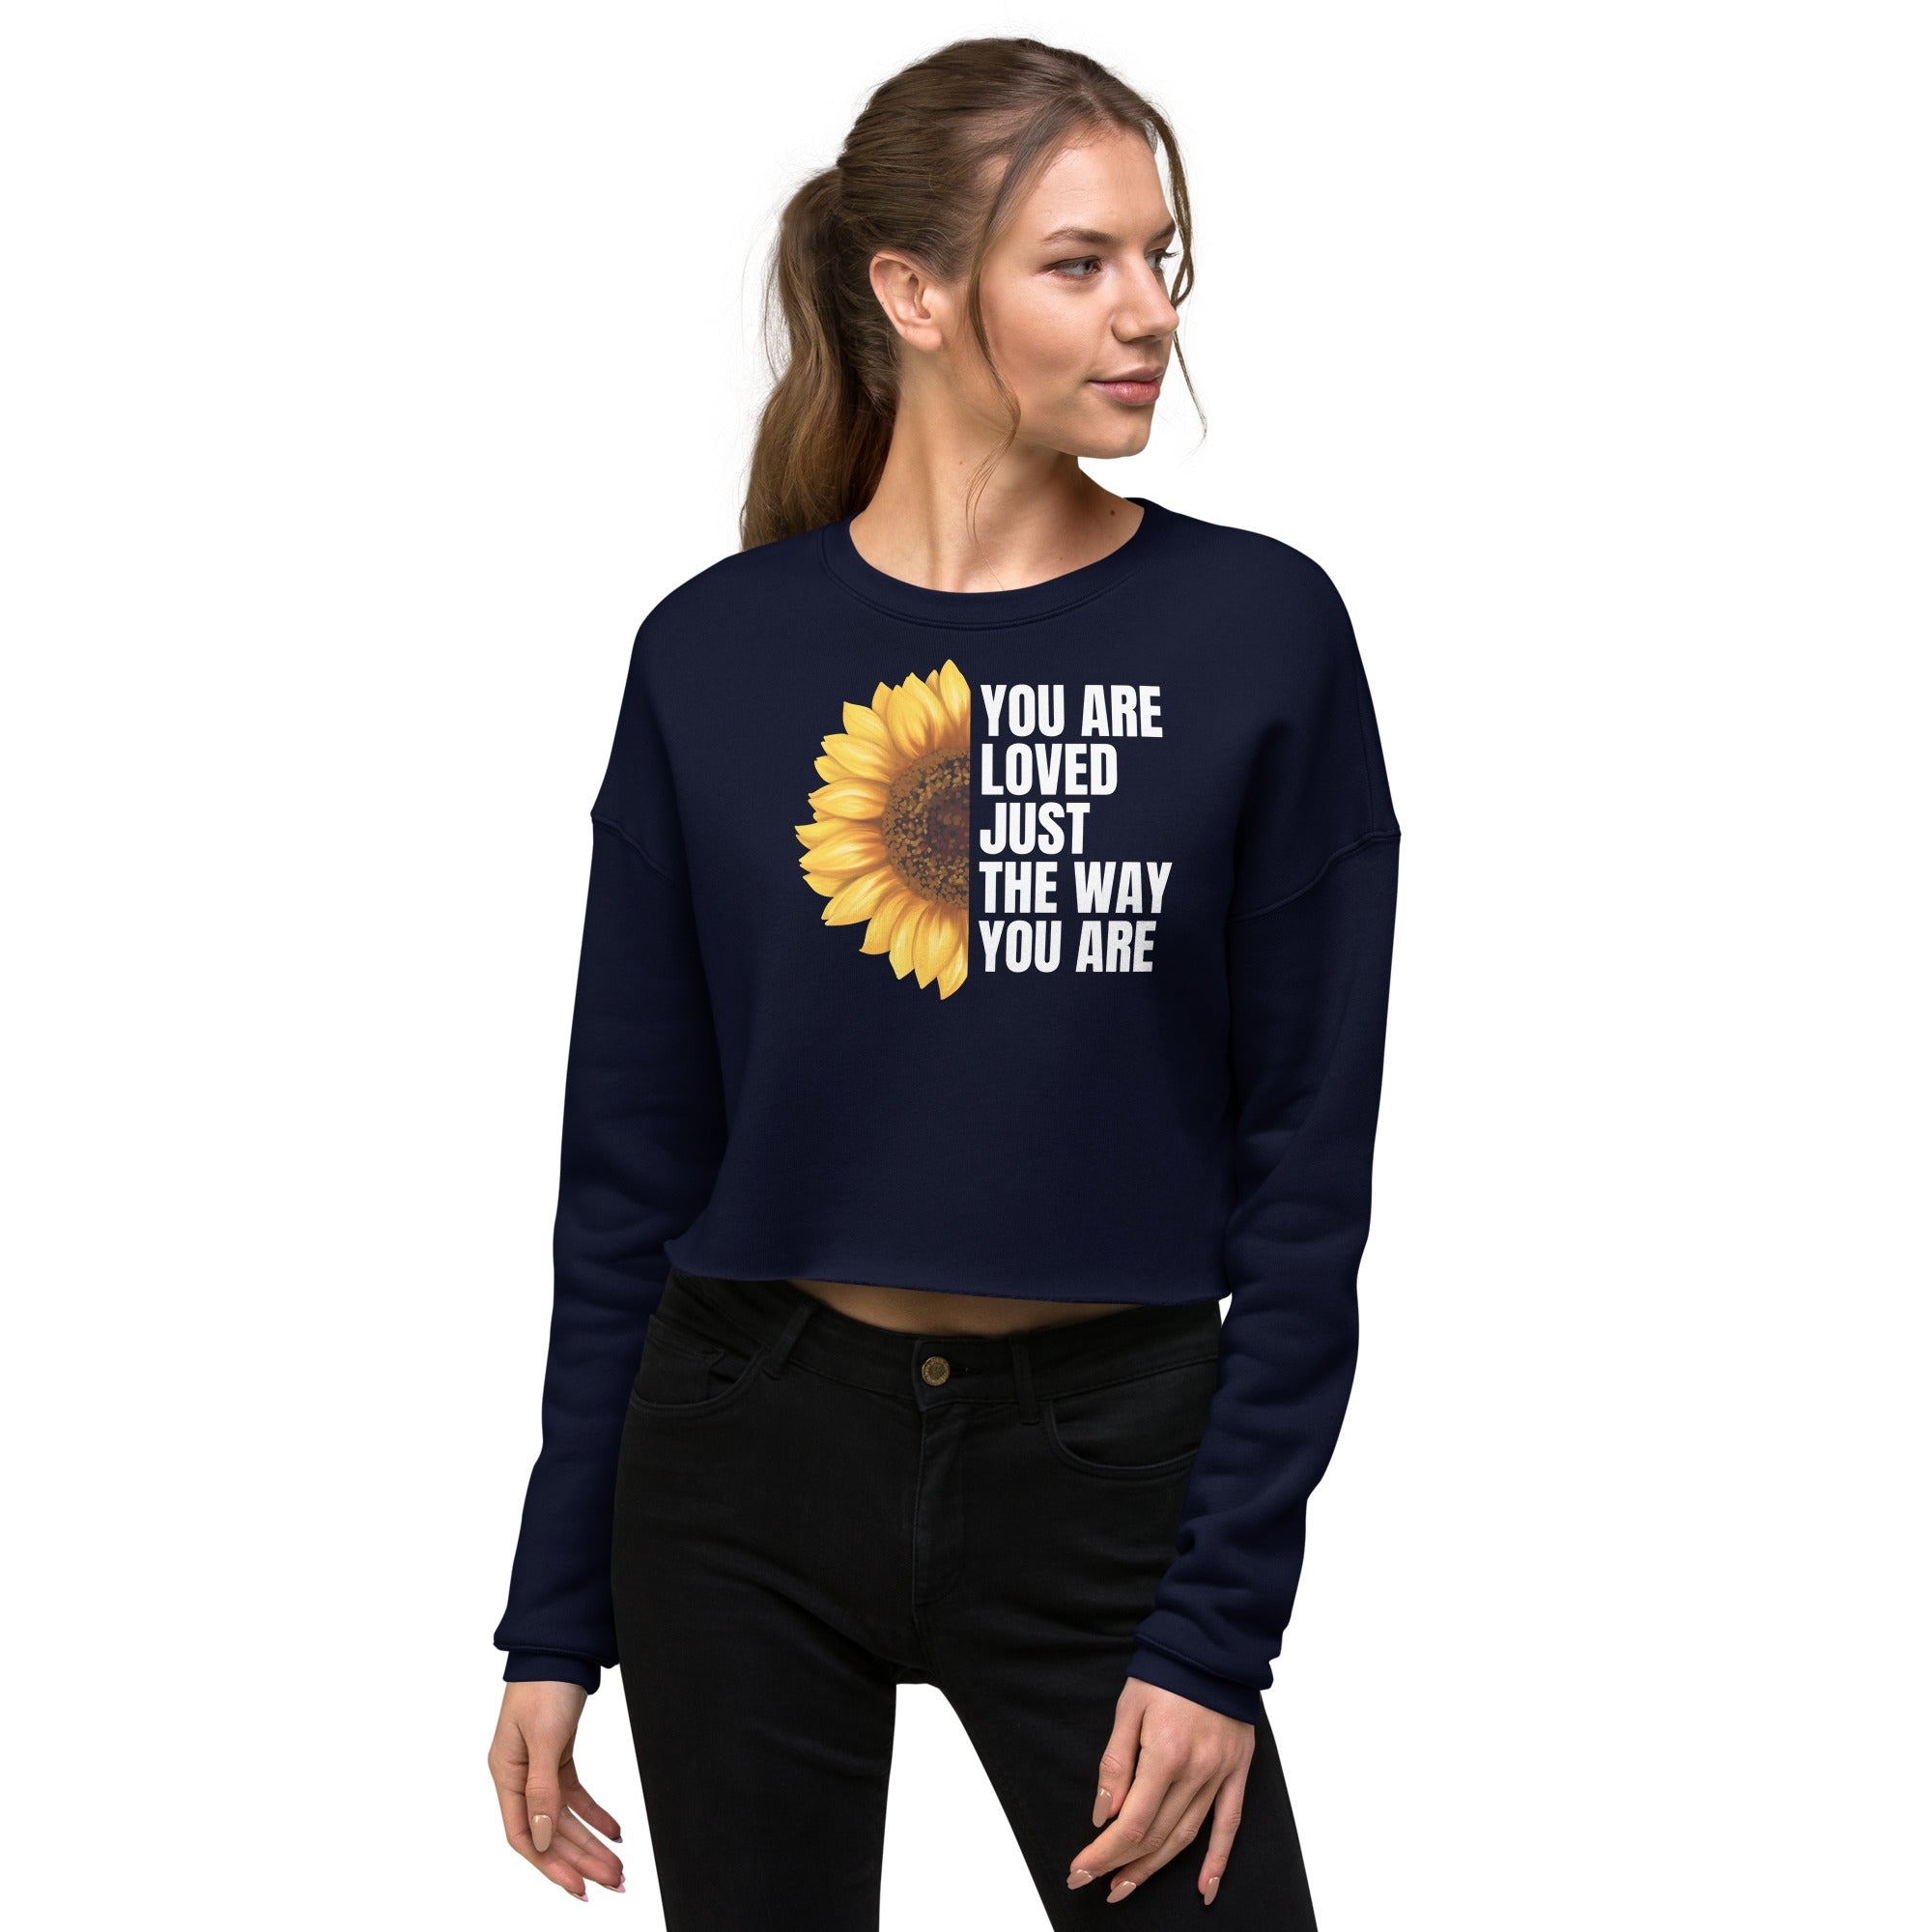 You Are Loved Just The Way You Are Crop Sweatshirt